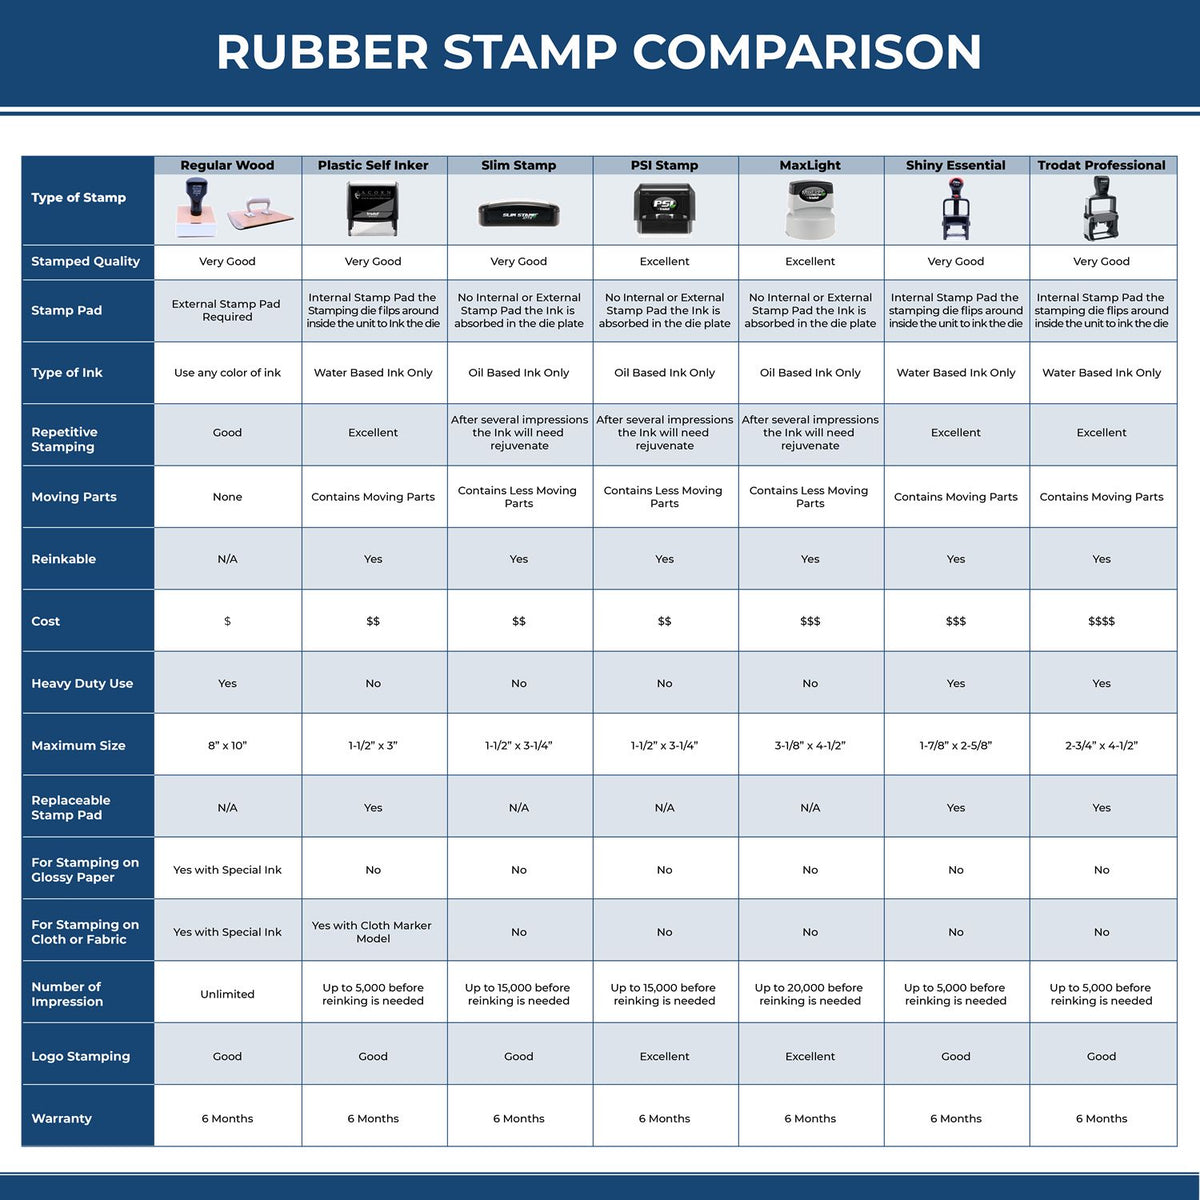 A comparison chart for the different types of mount models available for the Heavy-Duty Utah Rectangular Notary Stamp.